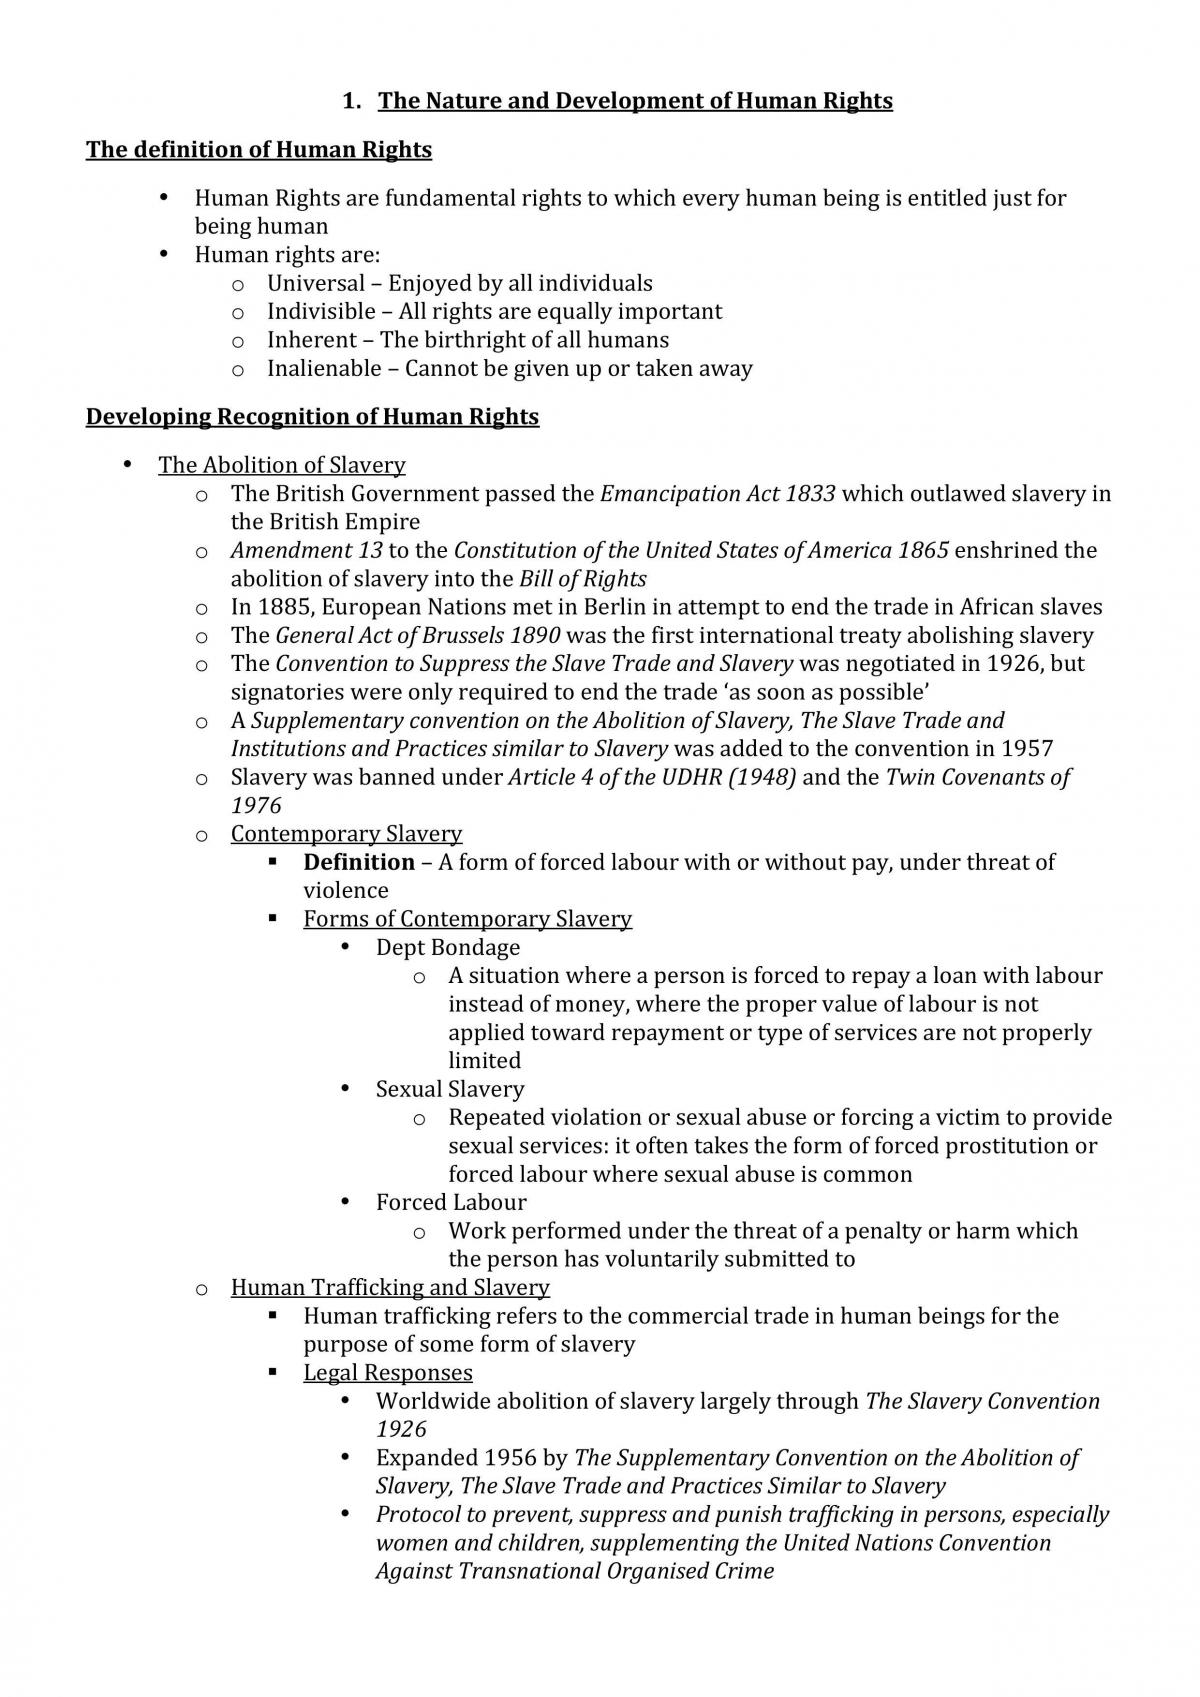 HSC Legal Studies Human Rights Summary - Page 1